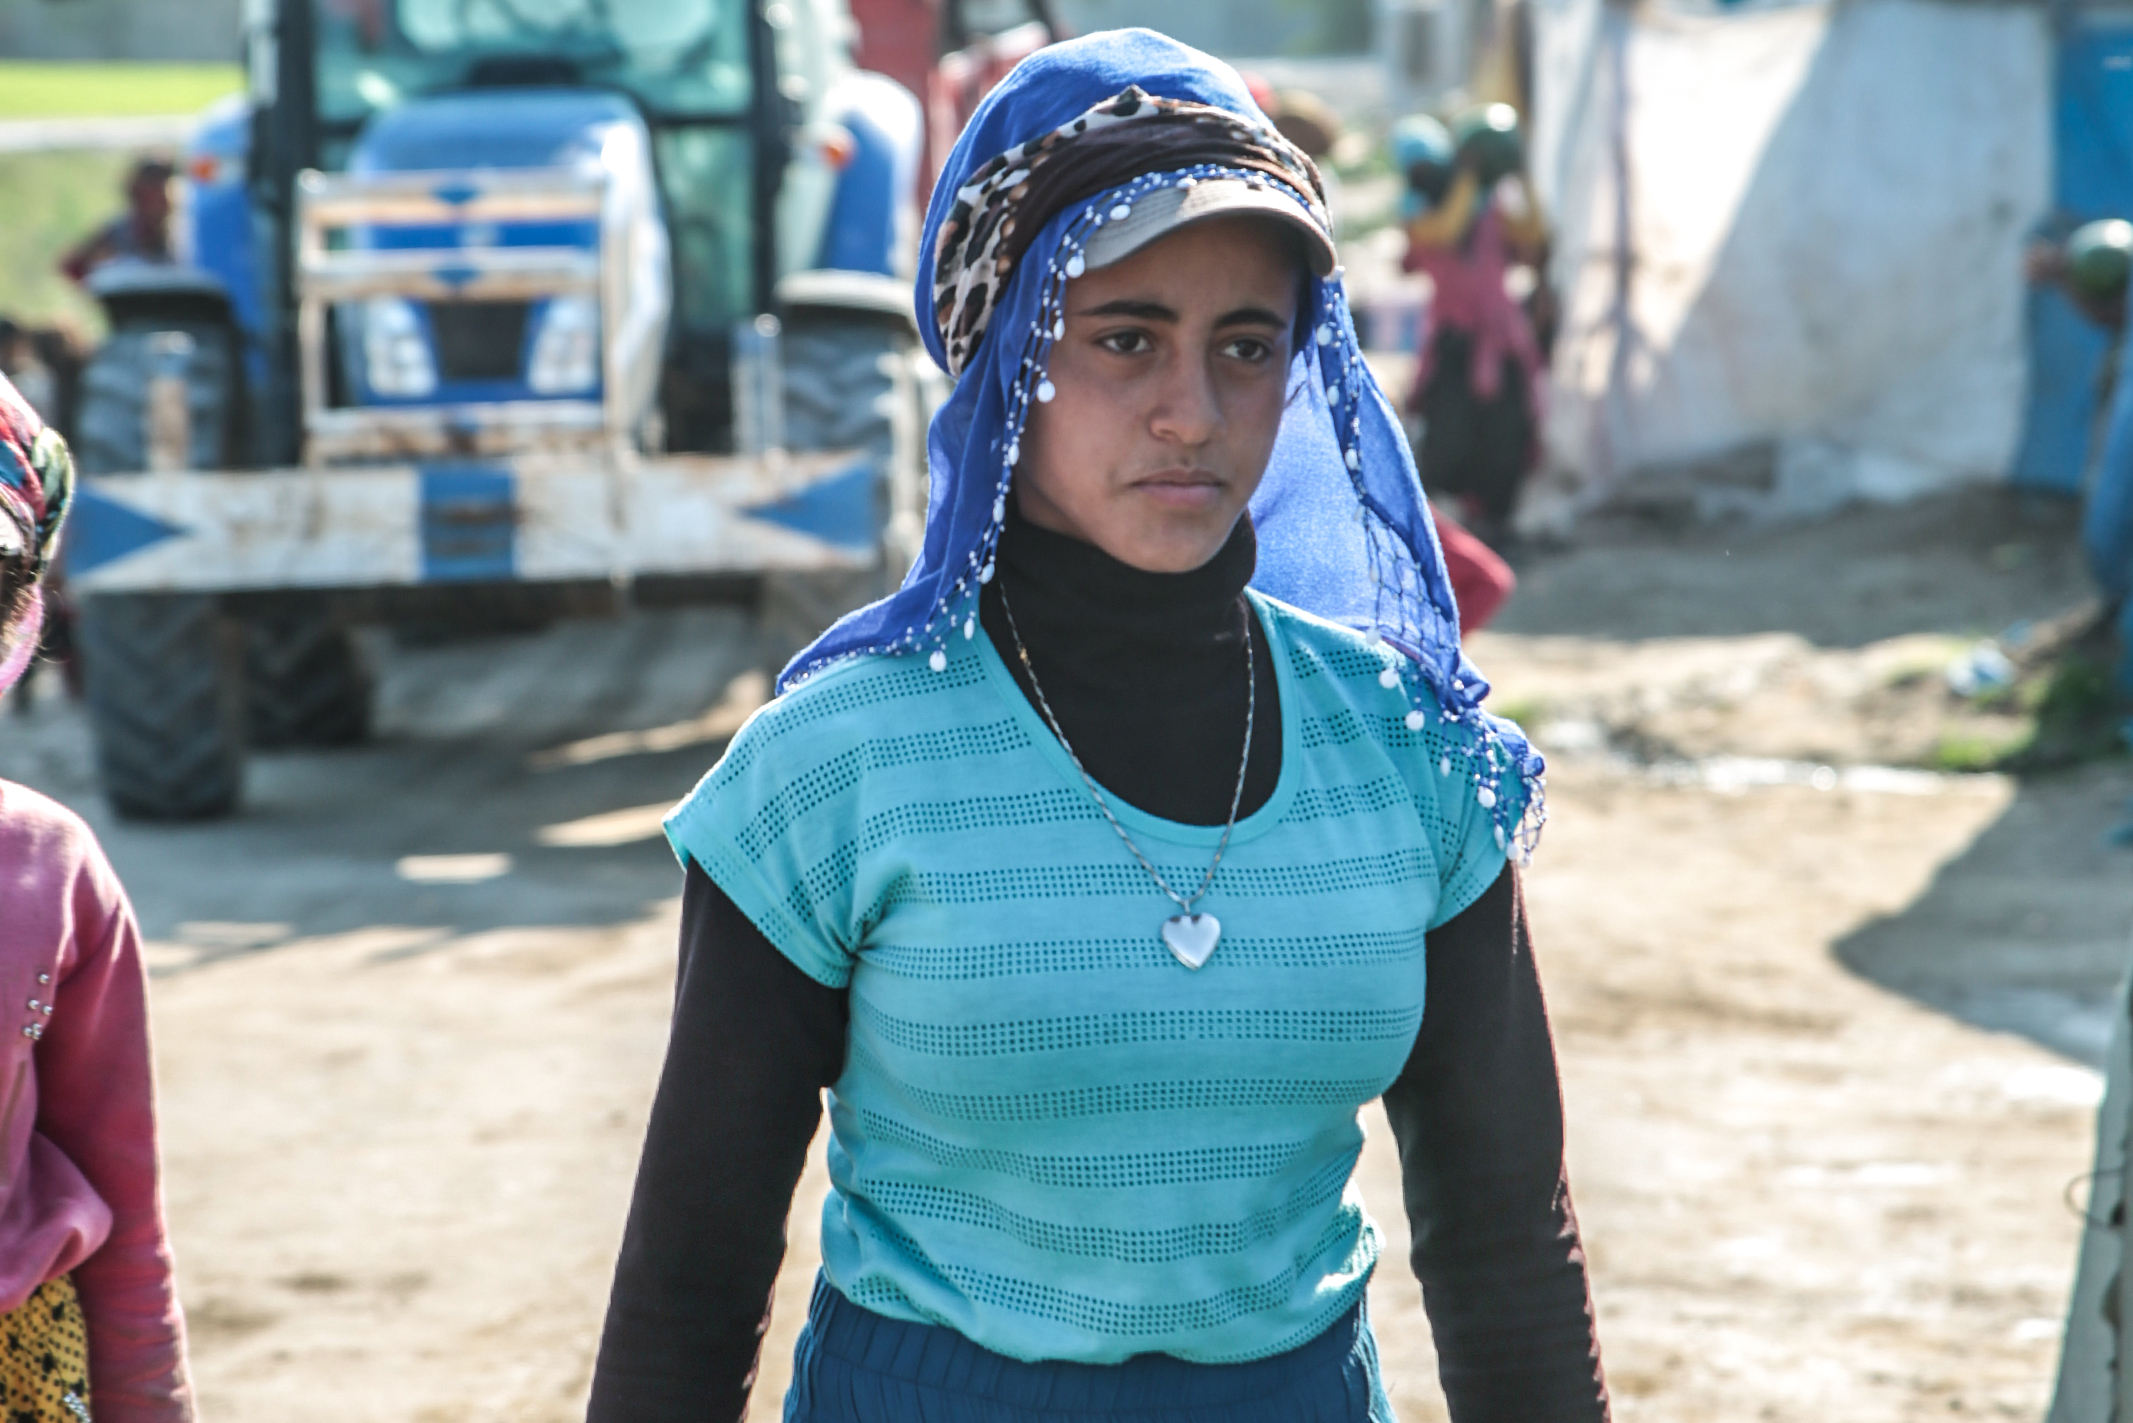 A Middle Eastern women who is a refugee in Greece walking through a camp wearing a head covering